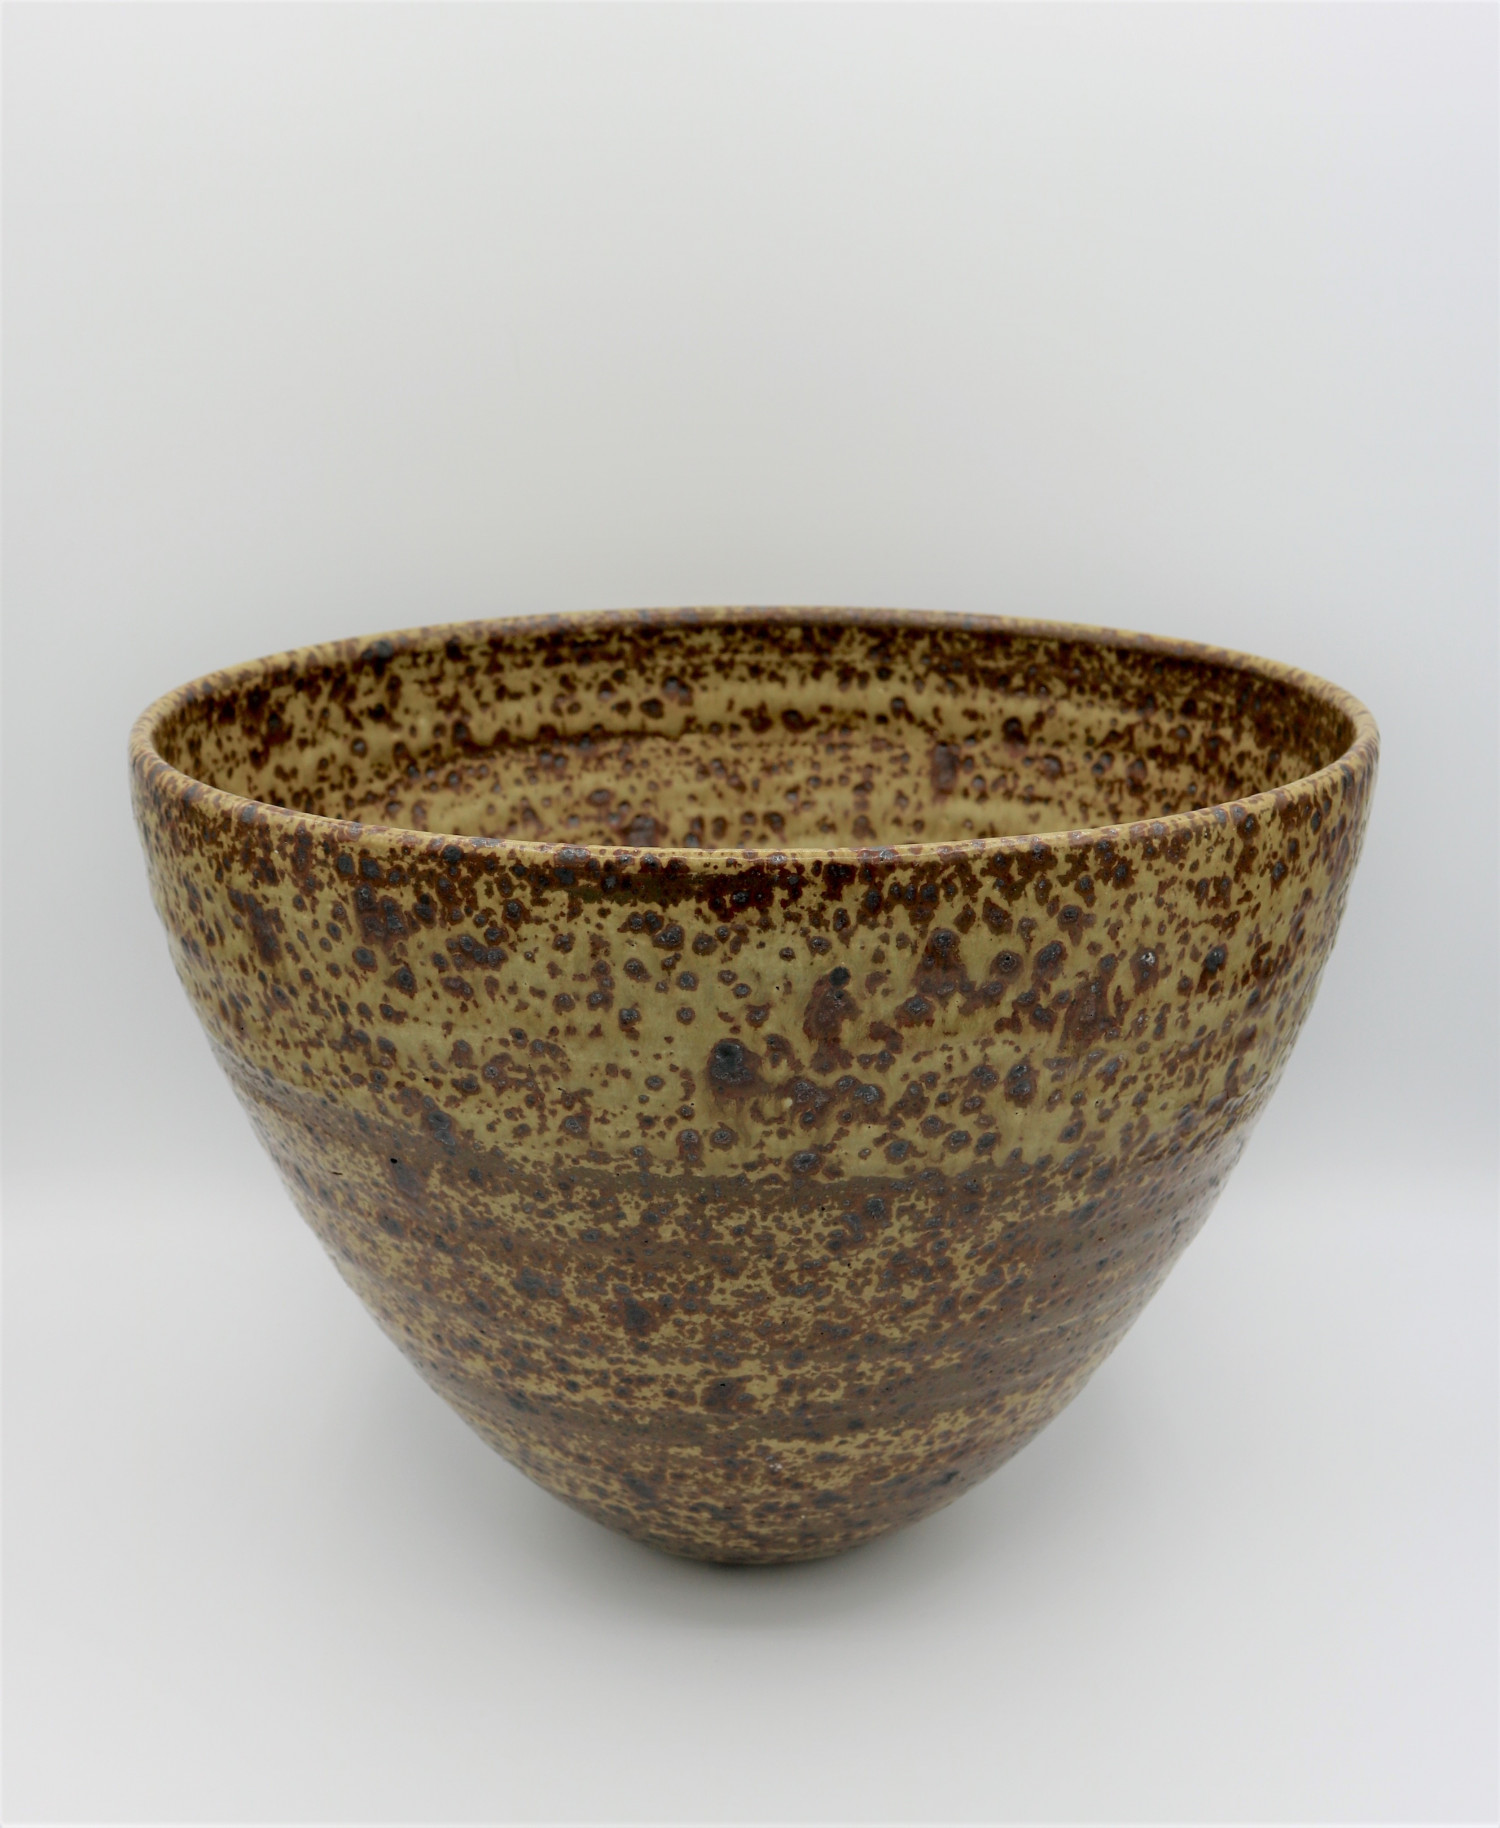 A Magnificent Large Early Bowl